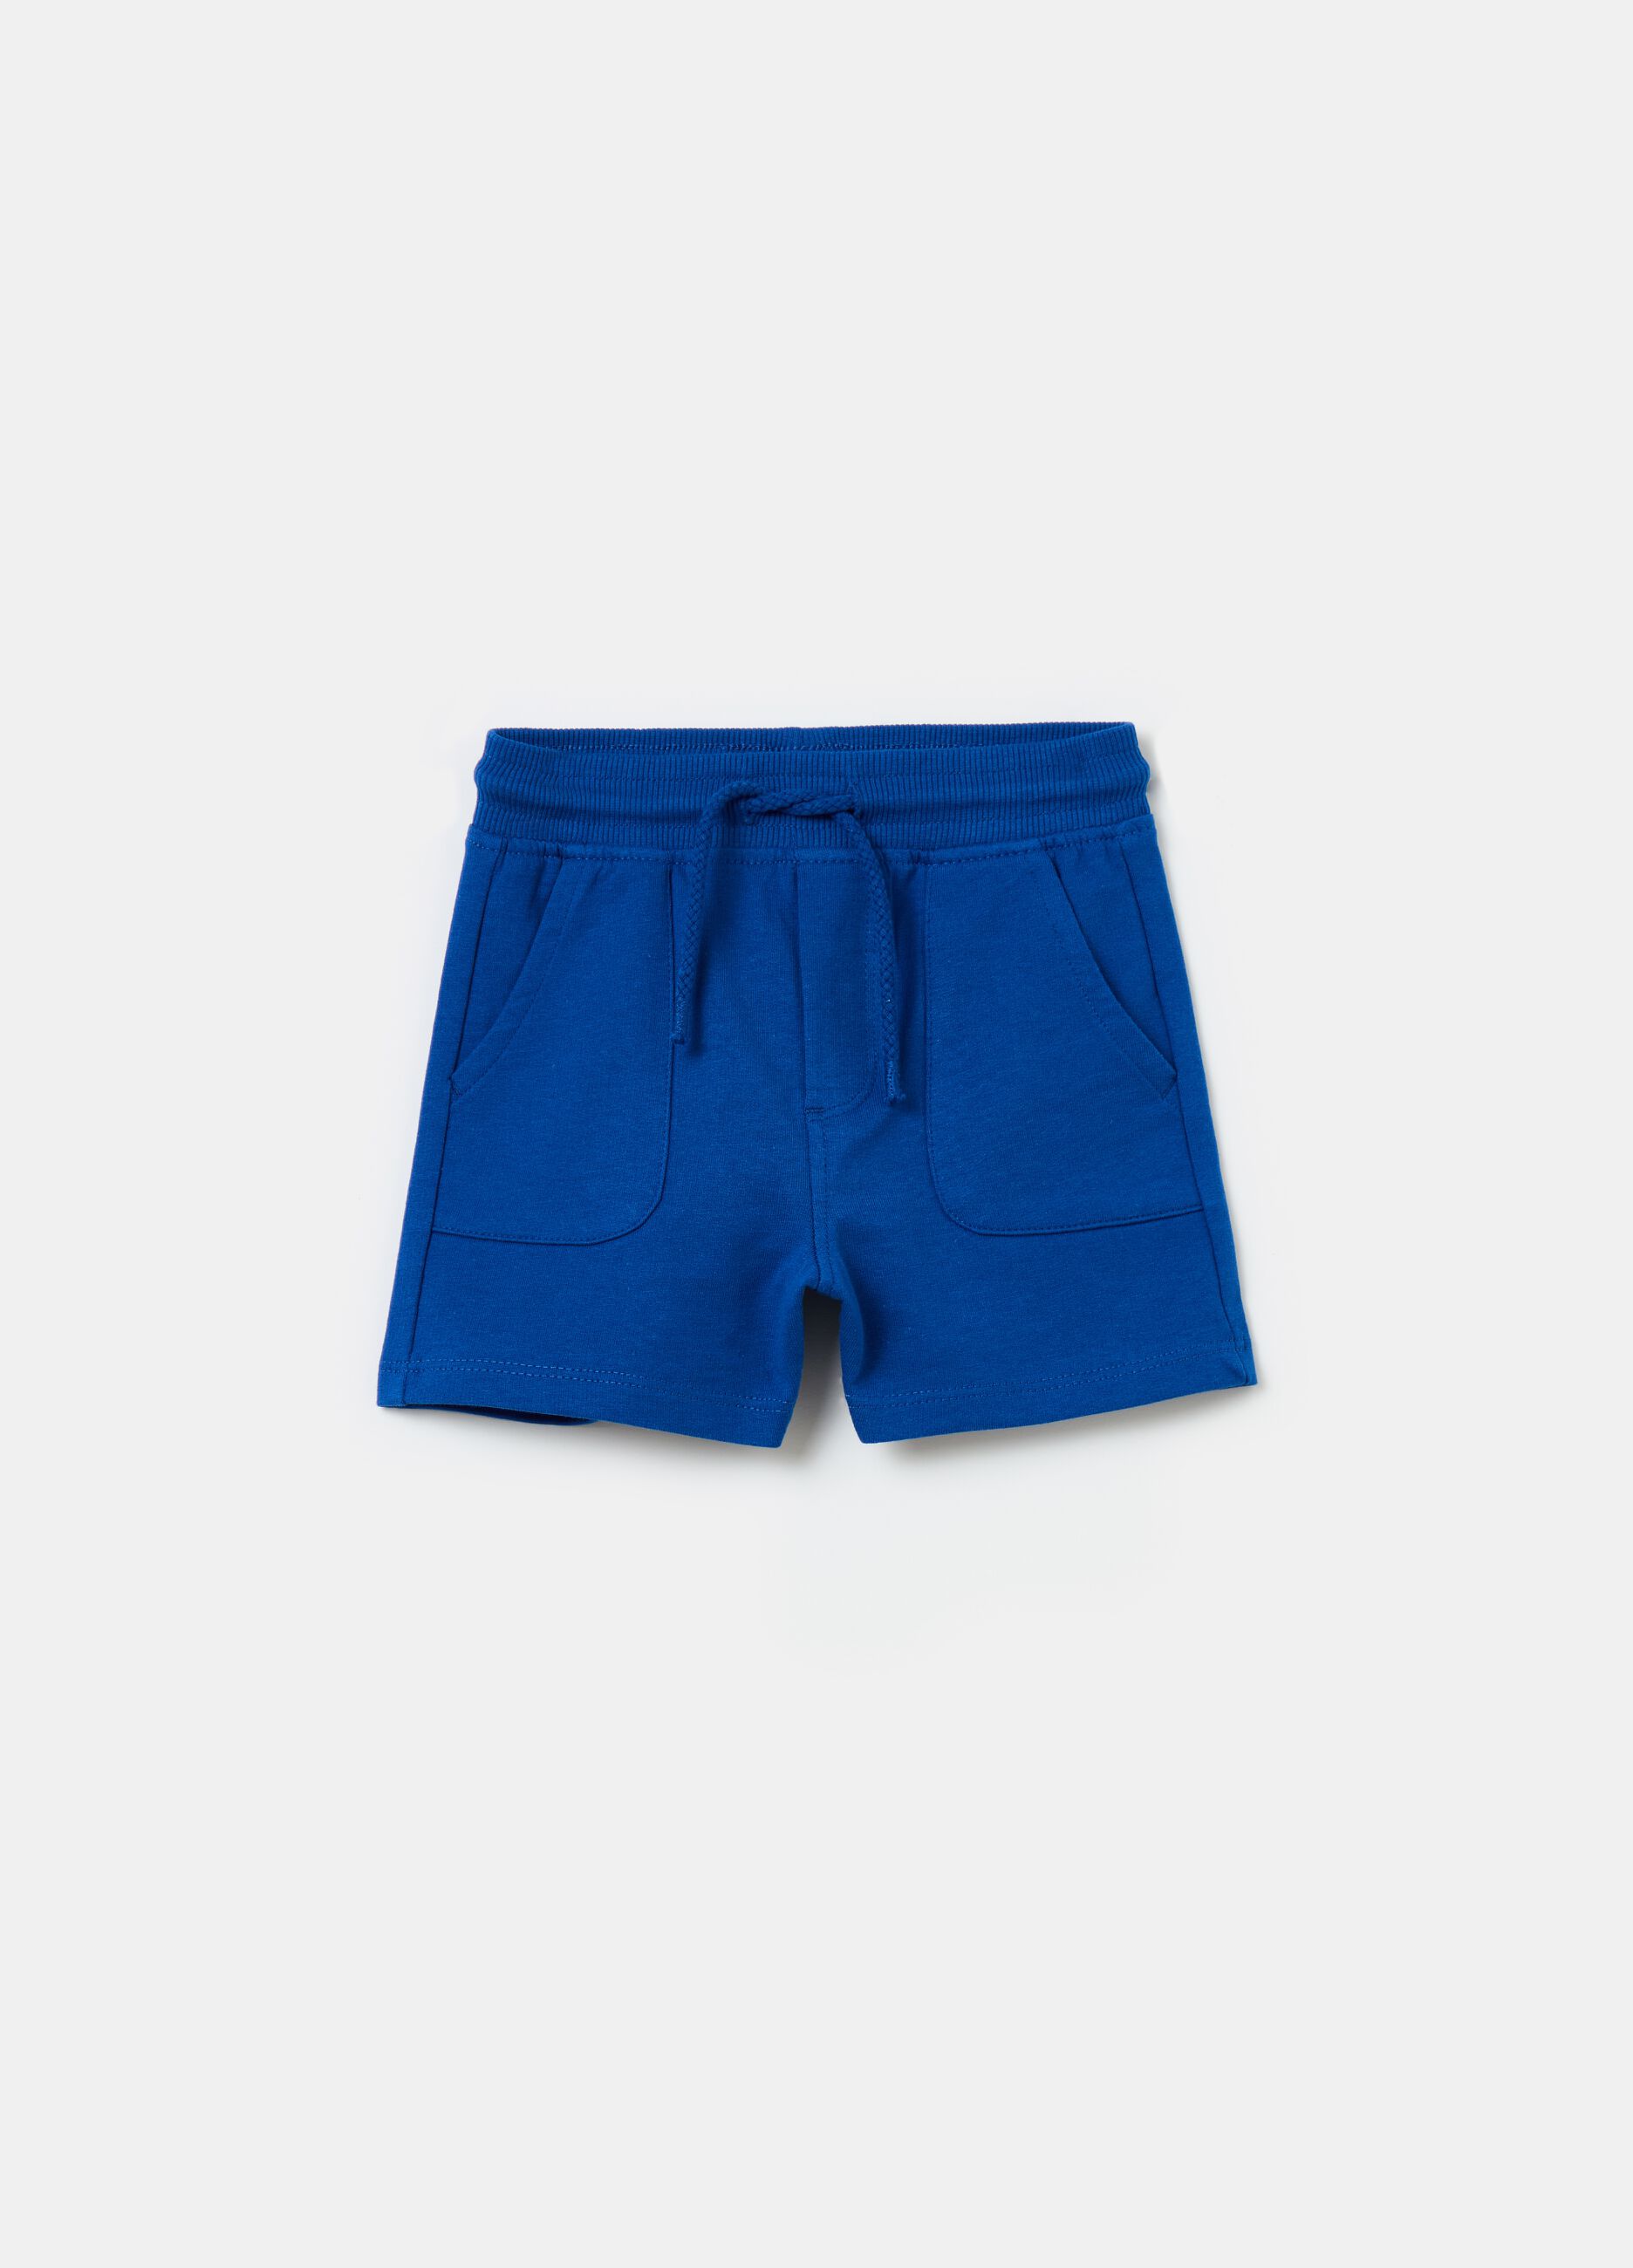 Cotton shorts with pockets and drawstring